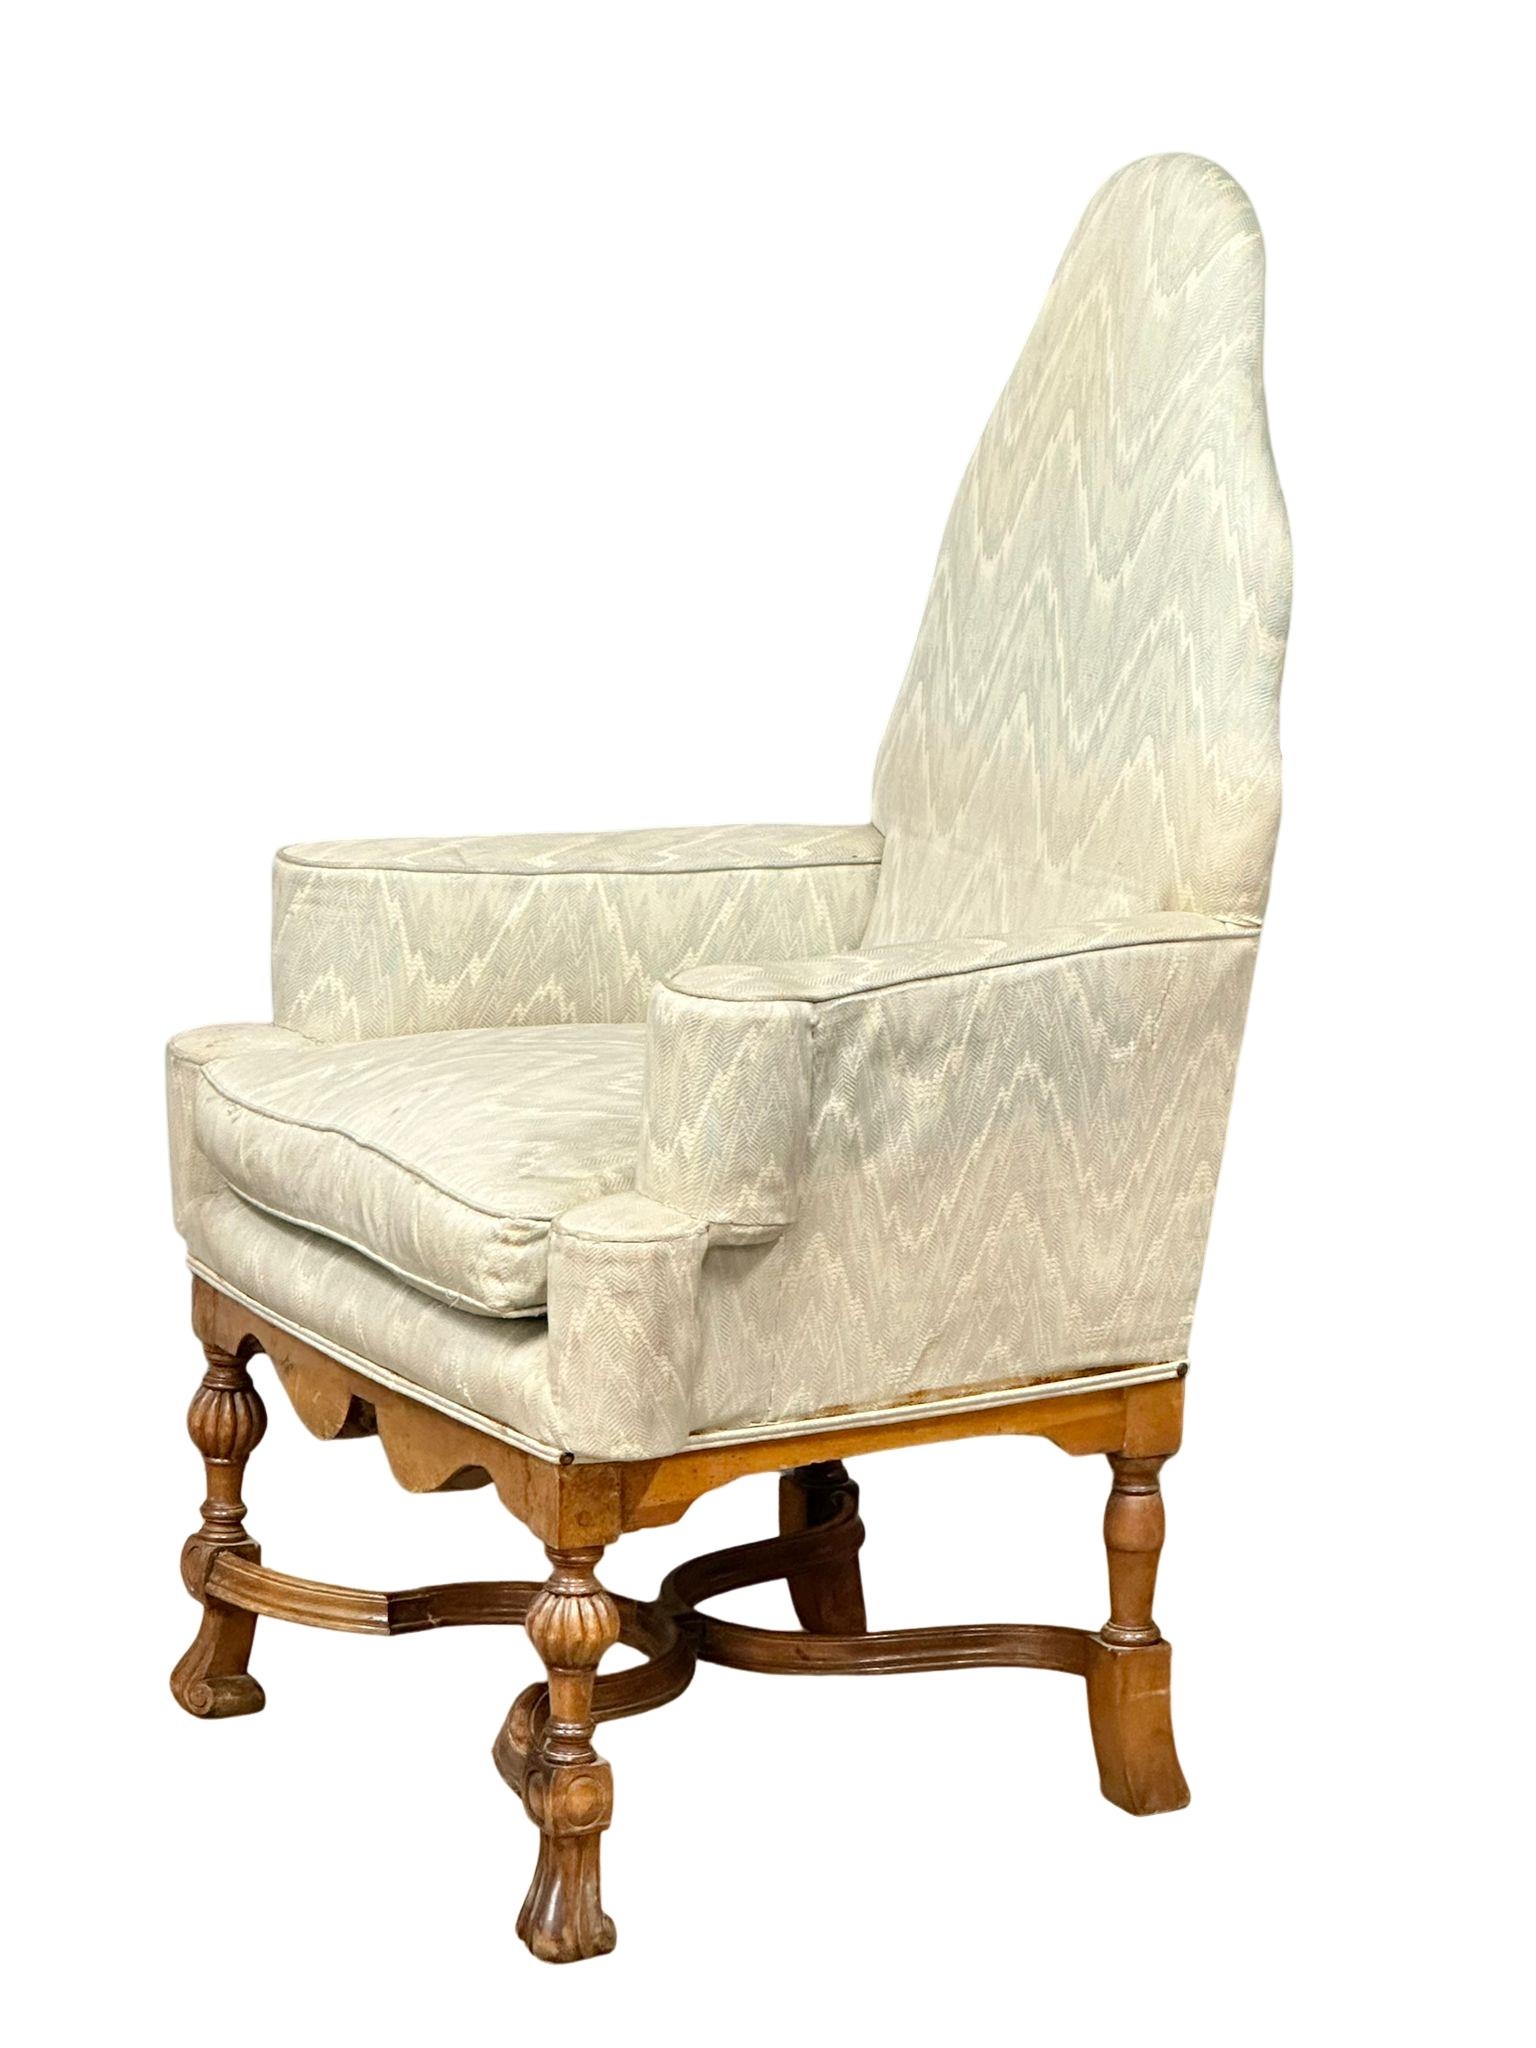 An early 20th century Charles II Carolean Revival armchair. Circa 1930. 63x80x122cm - Image 3 of 7